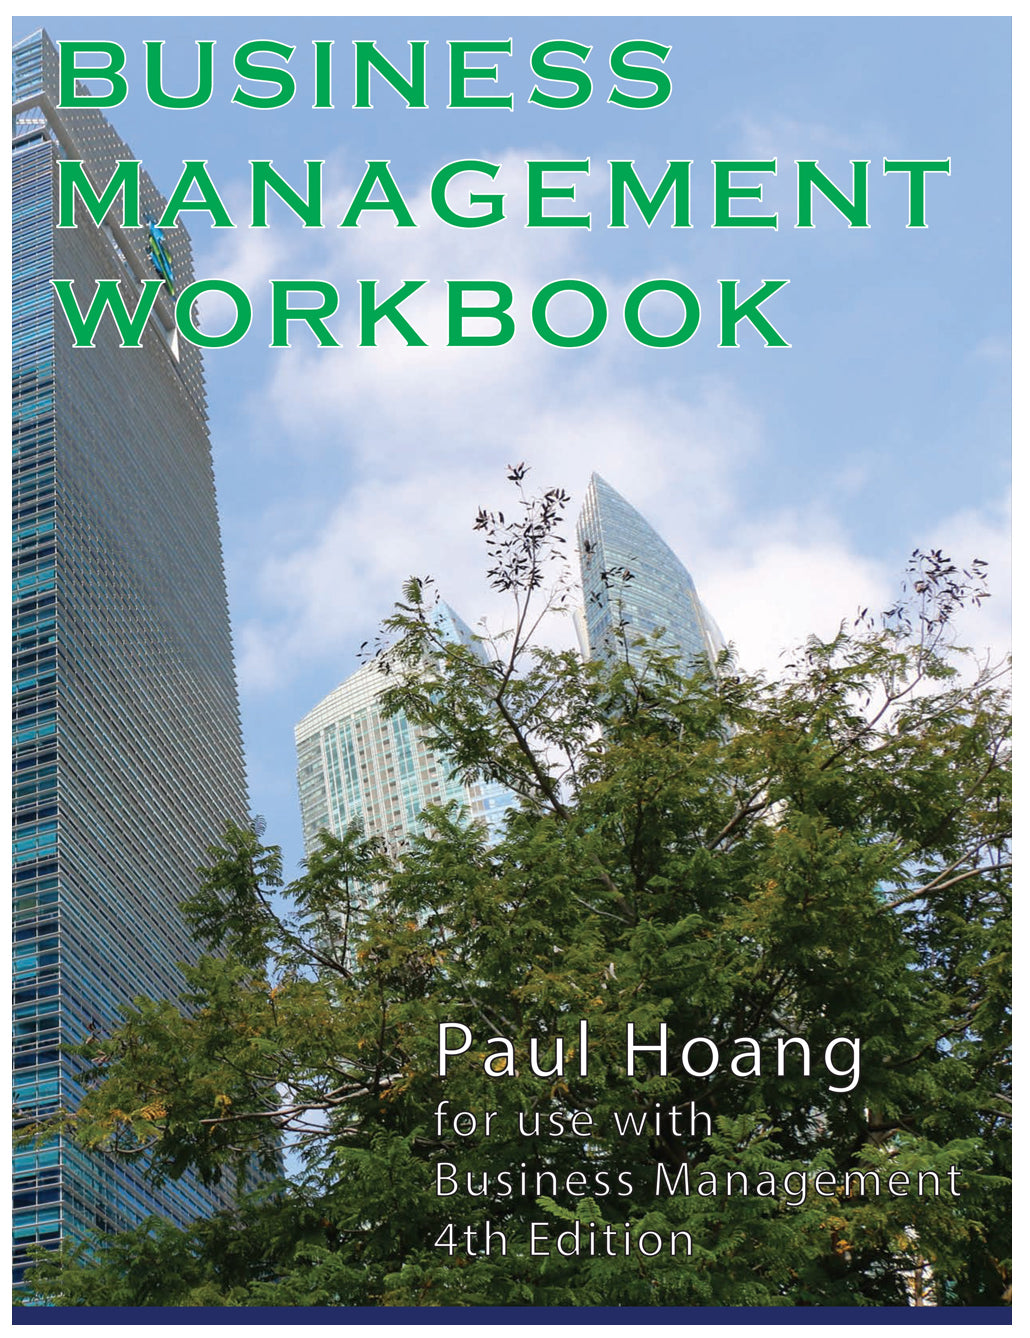 Business Management Workbook for 4th Edition